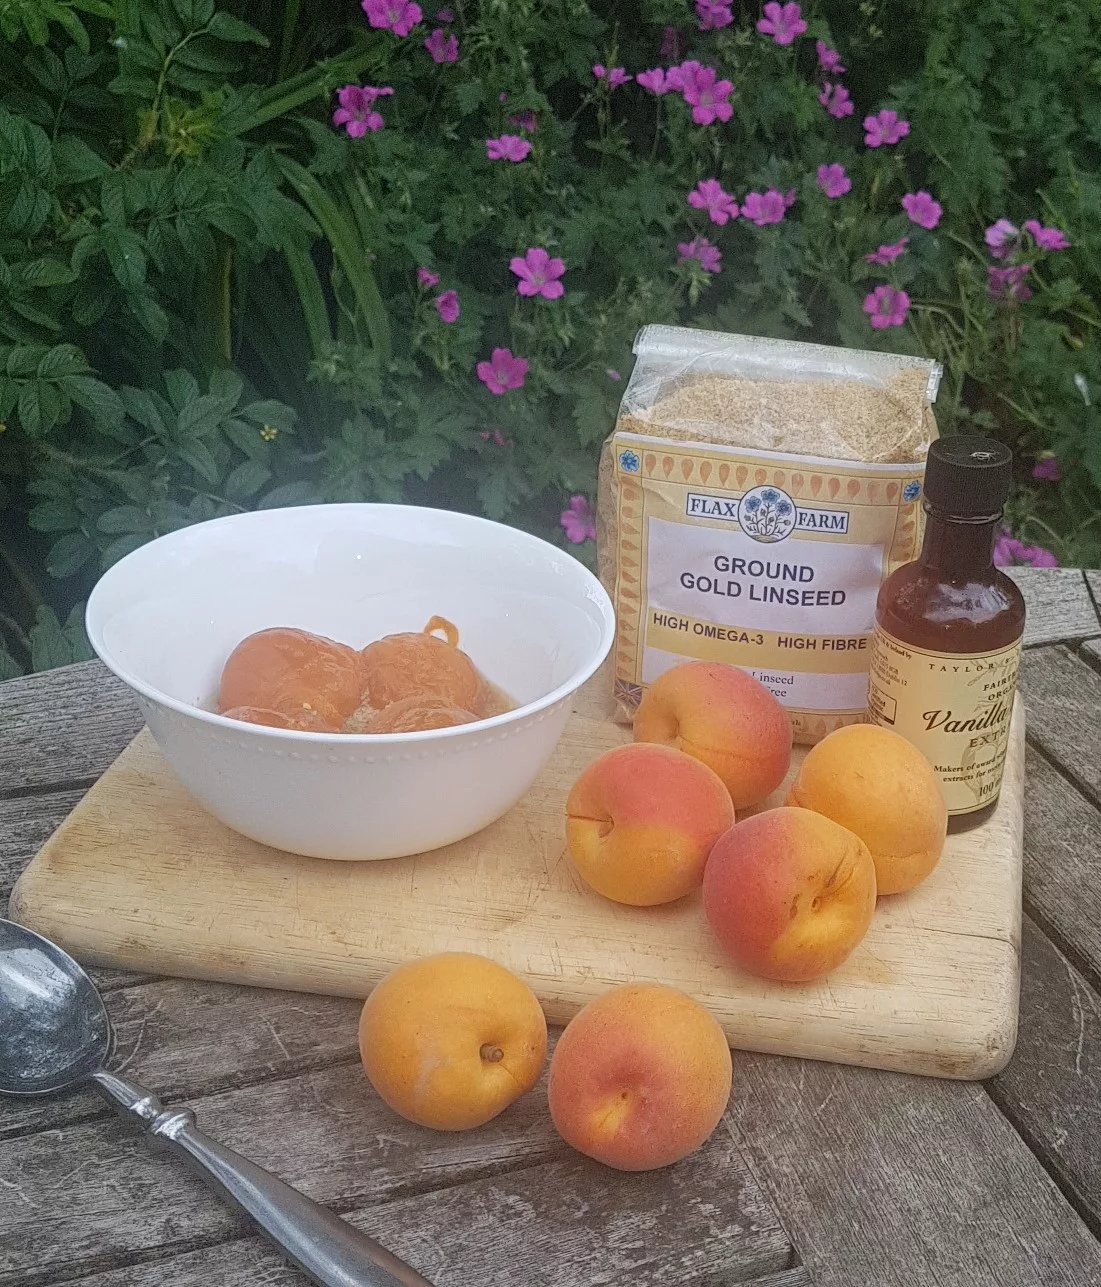 Poached apricots with Ground golden flaxseed